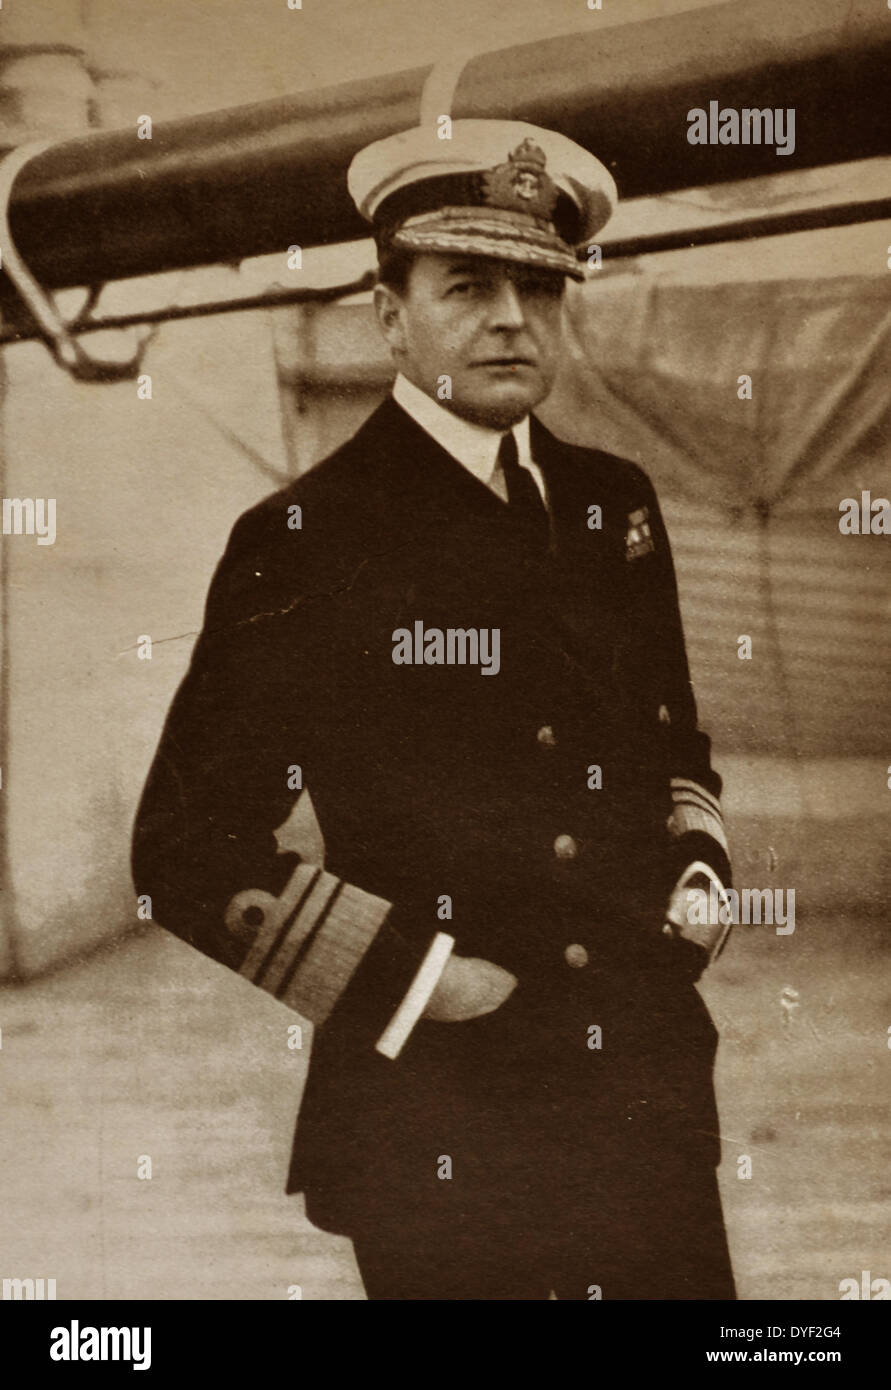 Admiral David Beatty 1914. Admiral of the Fleet David Richard Beatty, 1st Earl Beatty (17 January 1871 – 11 March 1936) was a Royal Navy officer. After serving in the Mahdist War and then the response to the Boxer Rebellion, he commanded the 1st Battle cruiser Squadron at the Battle of Jutland in 1916, a tactically indecisive engagement after which his aggressive approach was contrasted with the caution of his commander Admiral Sir John Jellicoe. Stock Photo